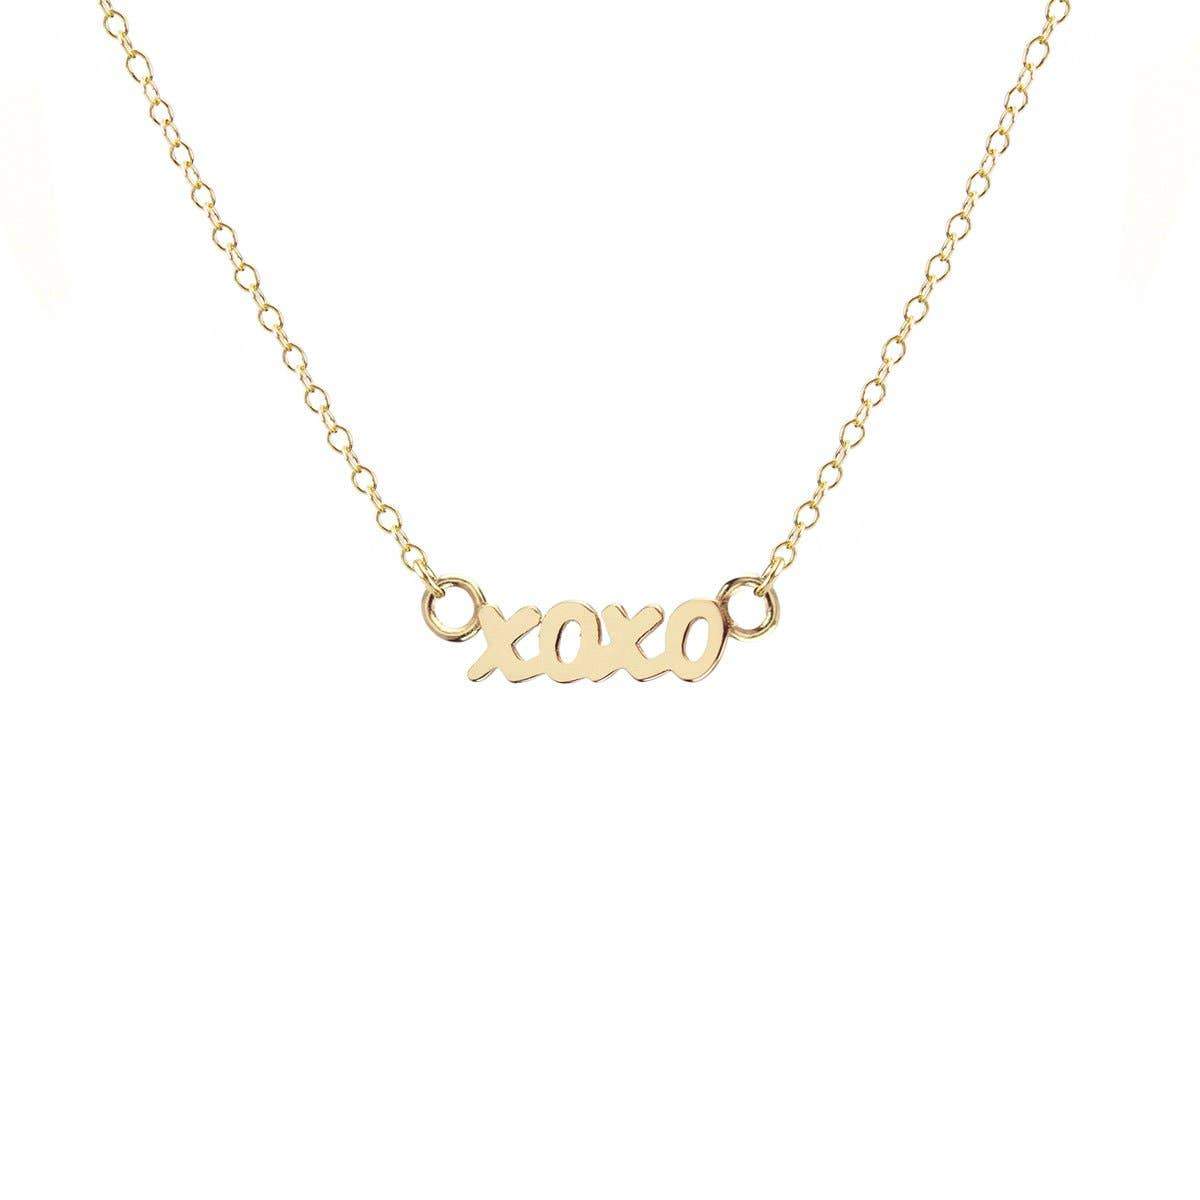 Xoxo Charm Necklace Kris Nations 